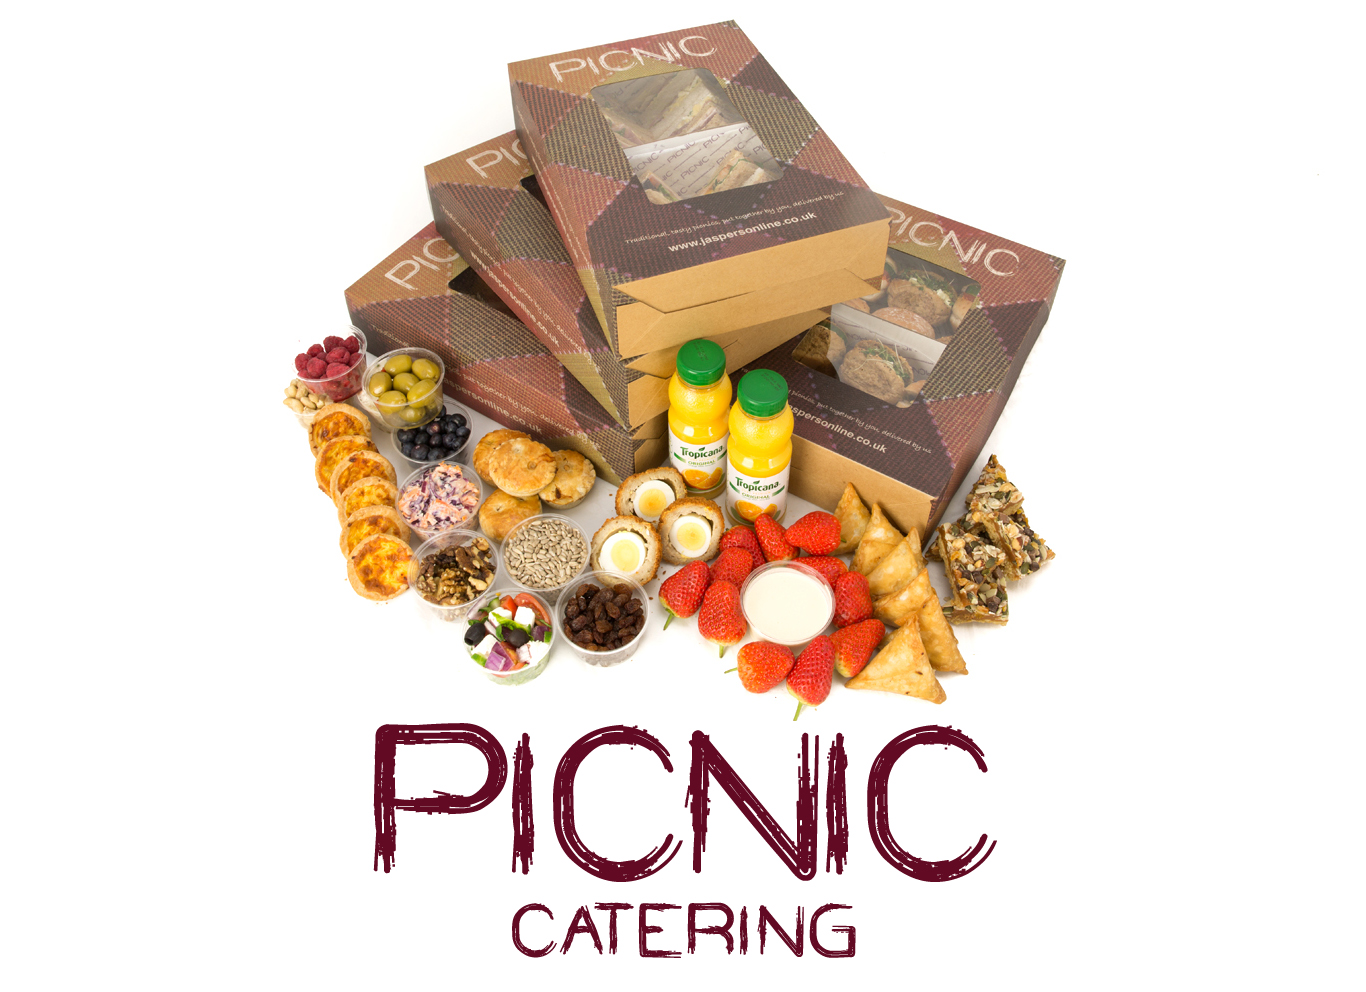 picnic catering